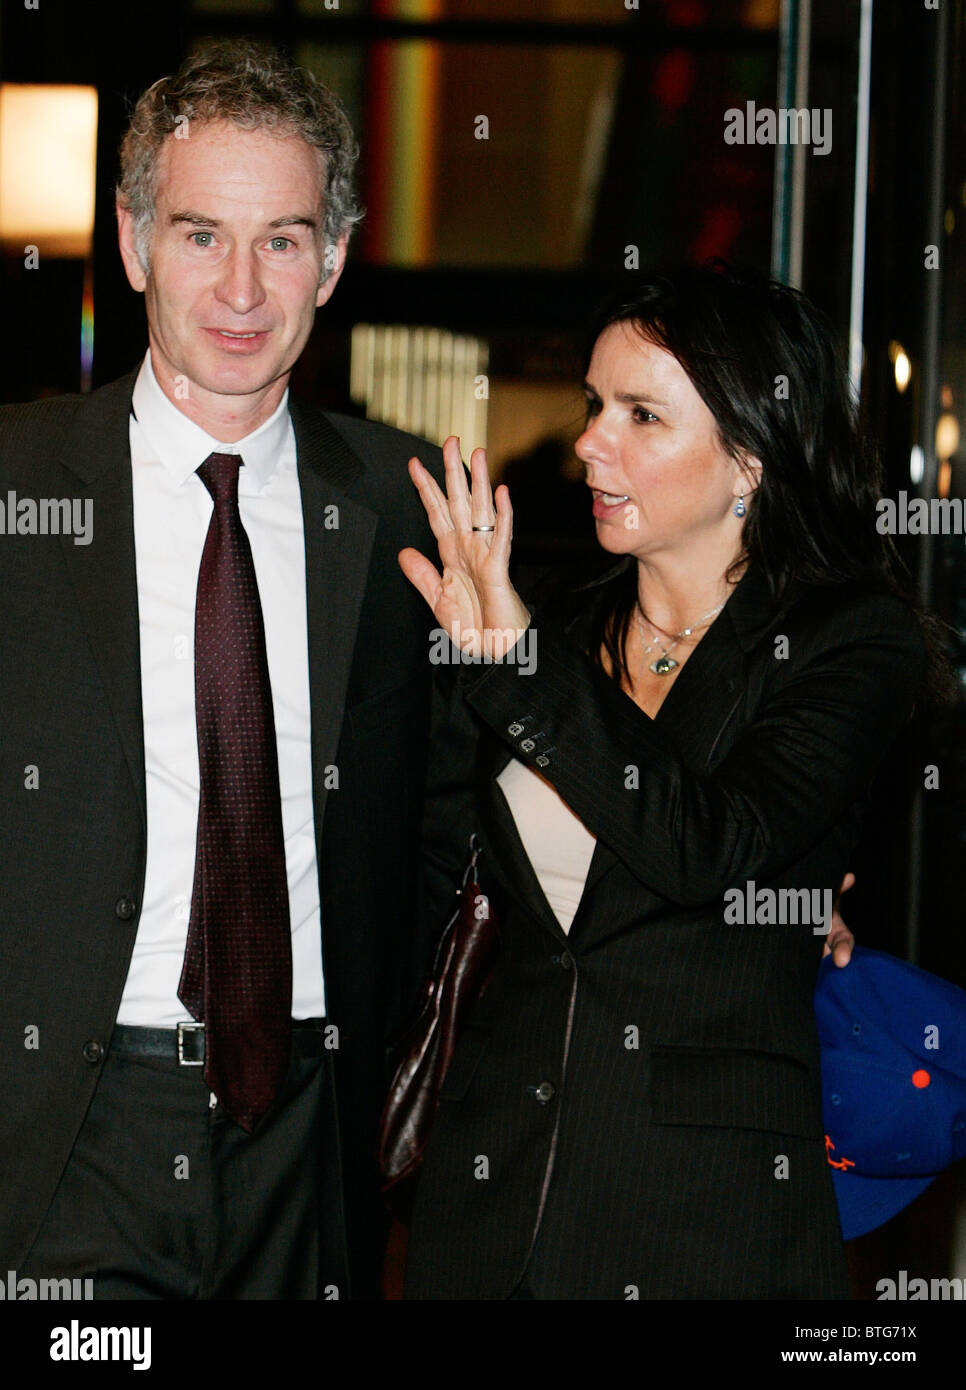 Tennis star John McEnroe and wife Patti Smyth at the Museum of Modern Art (MOMA) in New York , USA Stock Photo